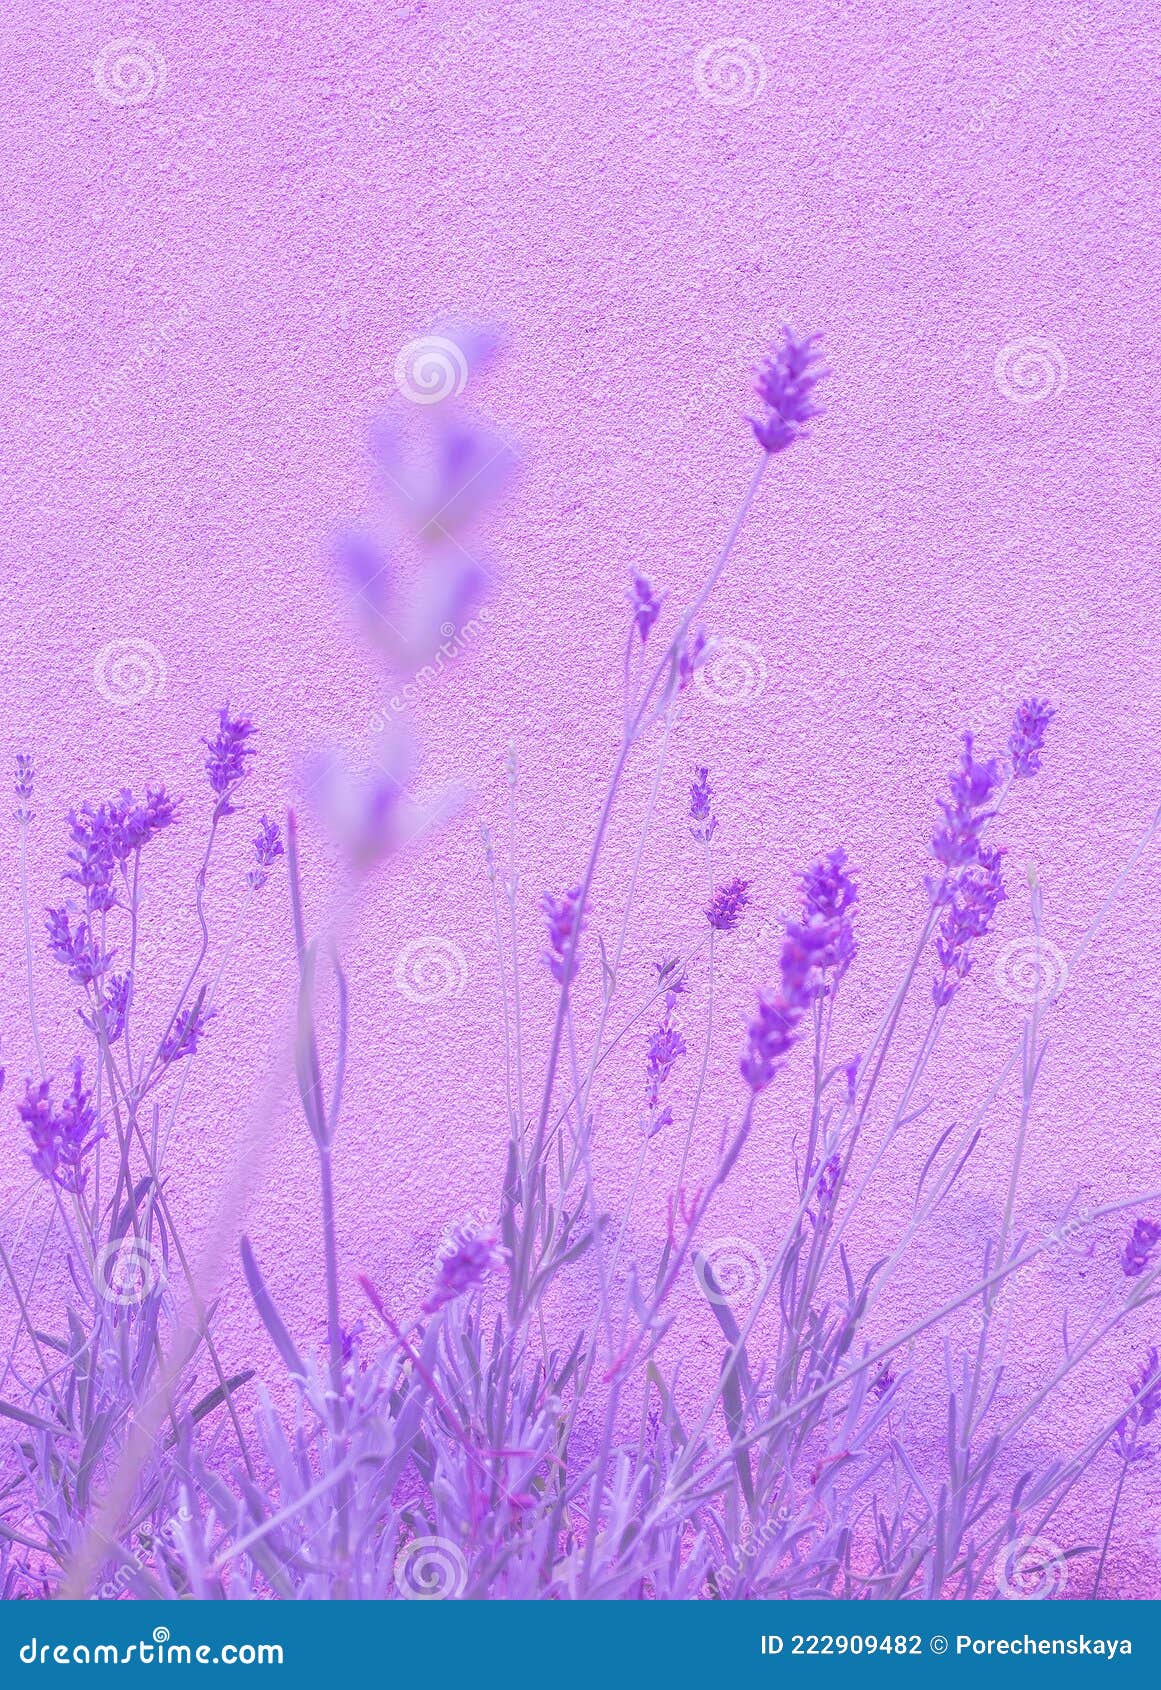 1920x1080 Basket Of Lavender Purple Flower 1080P Laptop Full HD Wallpaper  HD Flowers 4K Wallpapers Images Photos and Background  Wallpapers Den